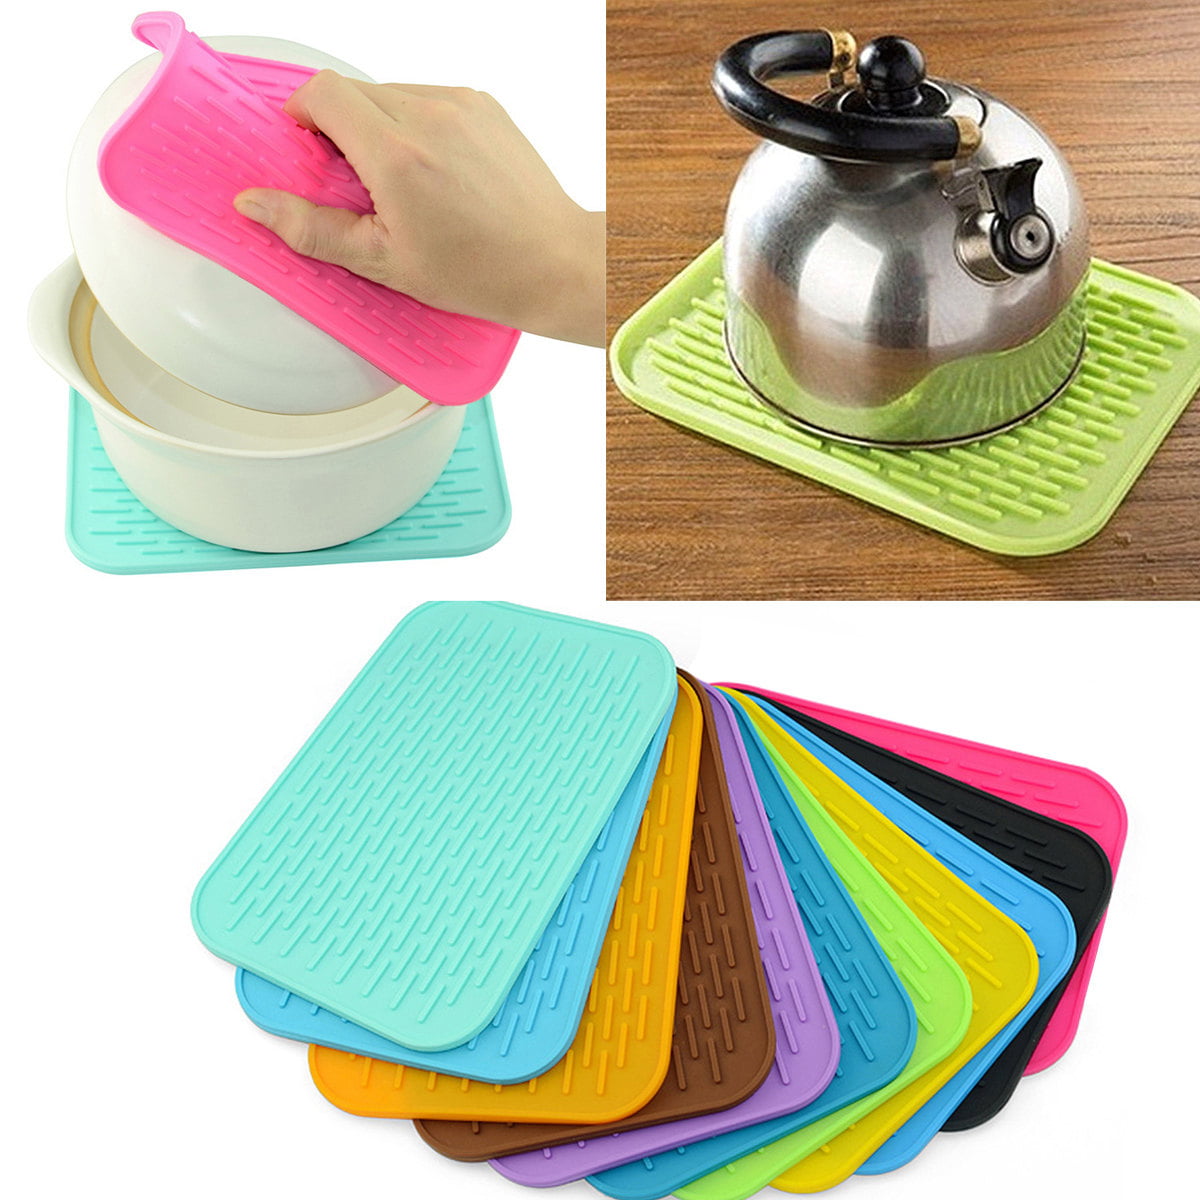 Pink TOPBATHY Silicone Placemats Waterproof Thick Heat Resistant Coaster Nonslip Placemat Nonskid Table Mat Pads Protector 